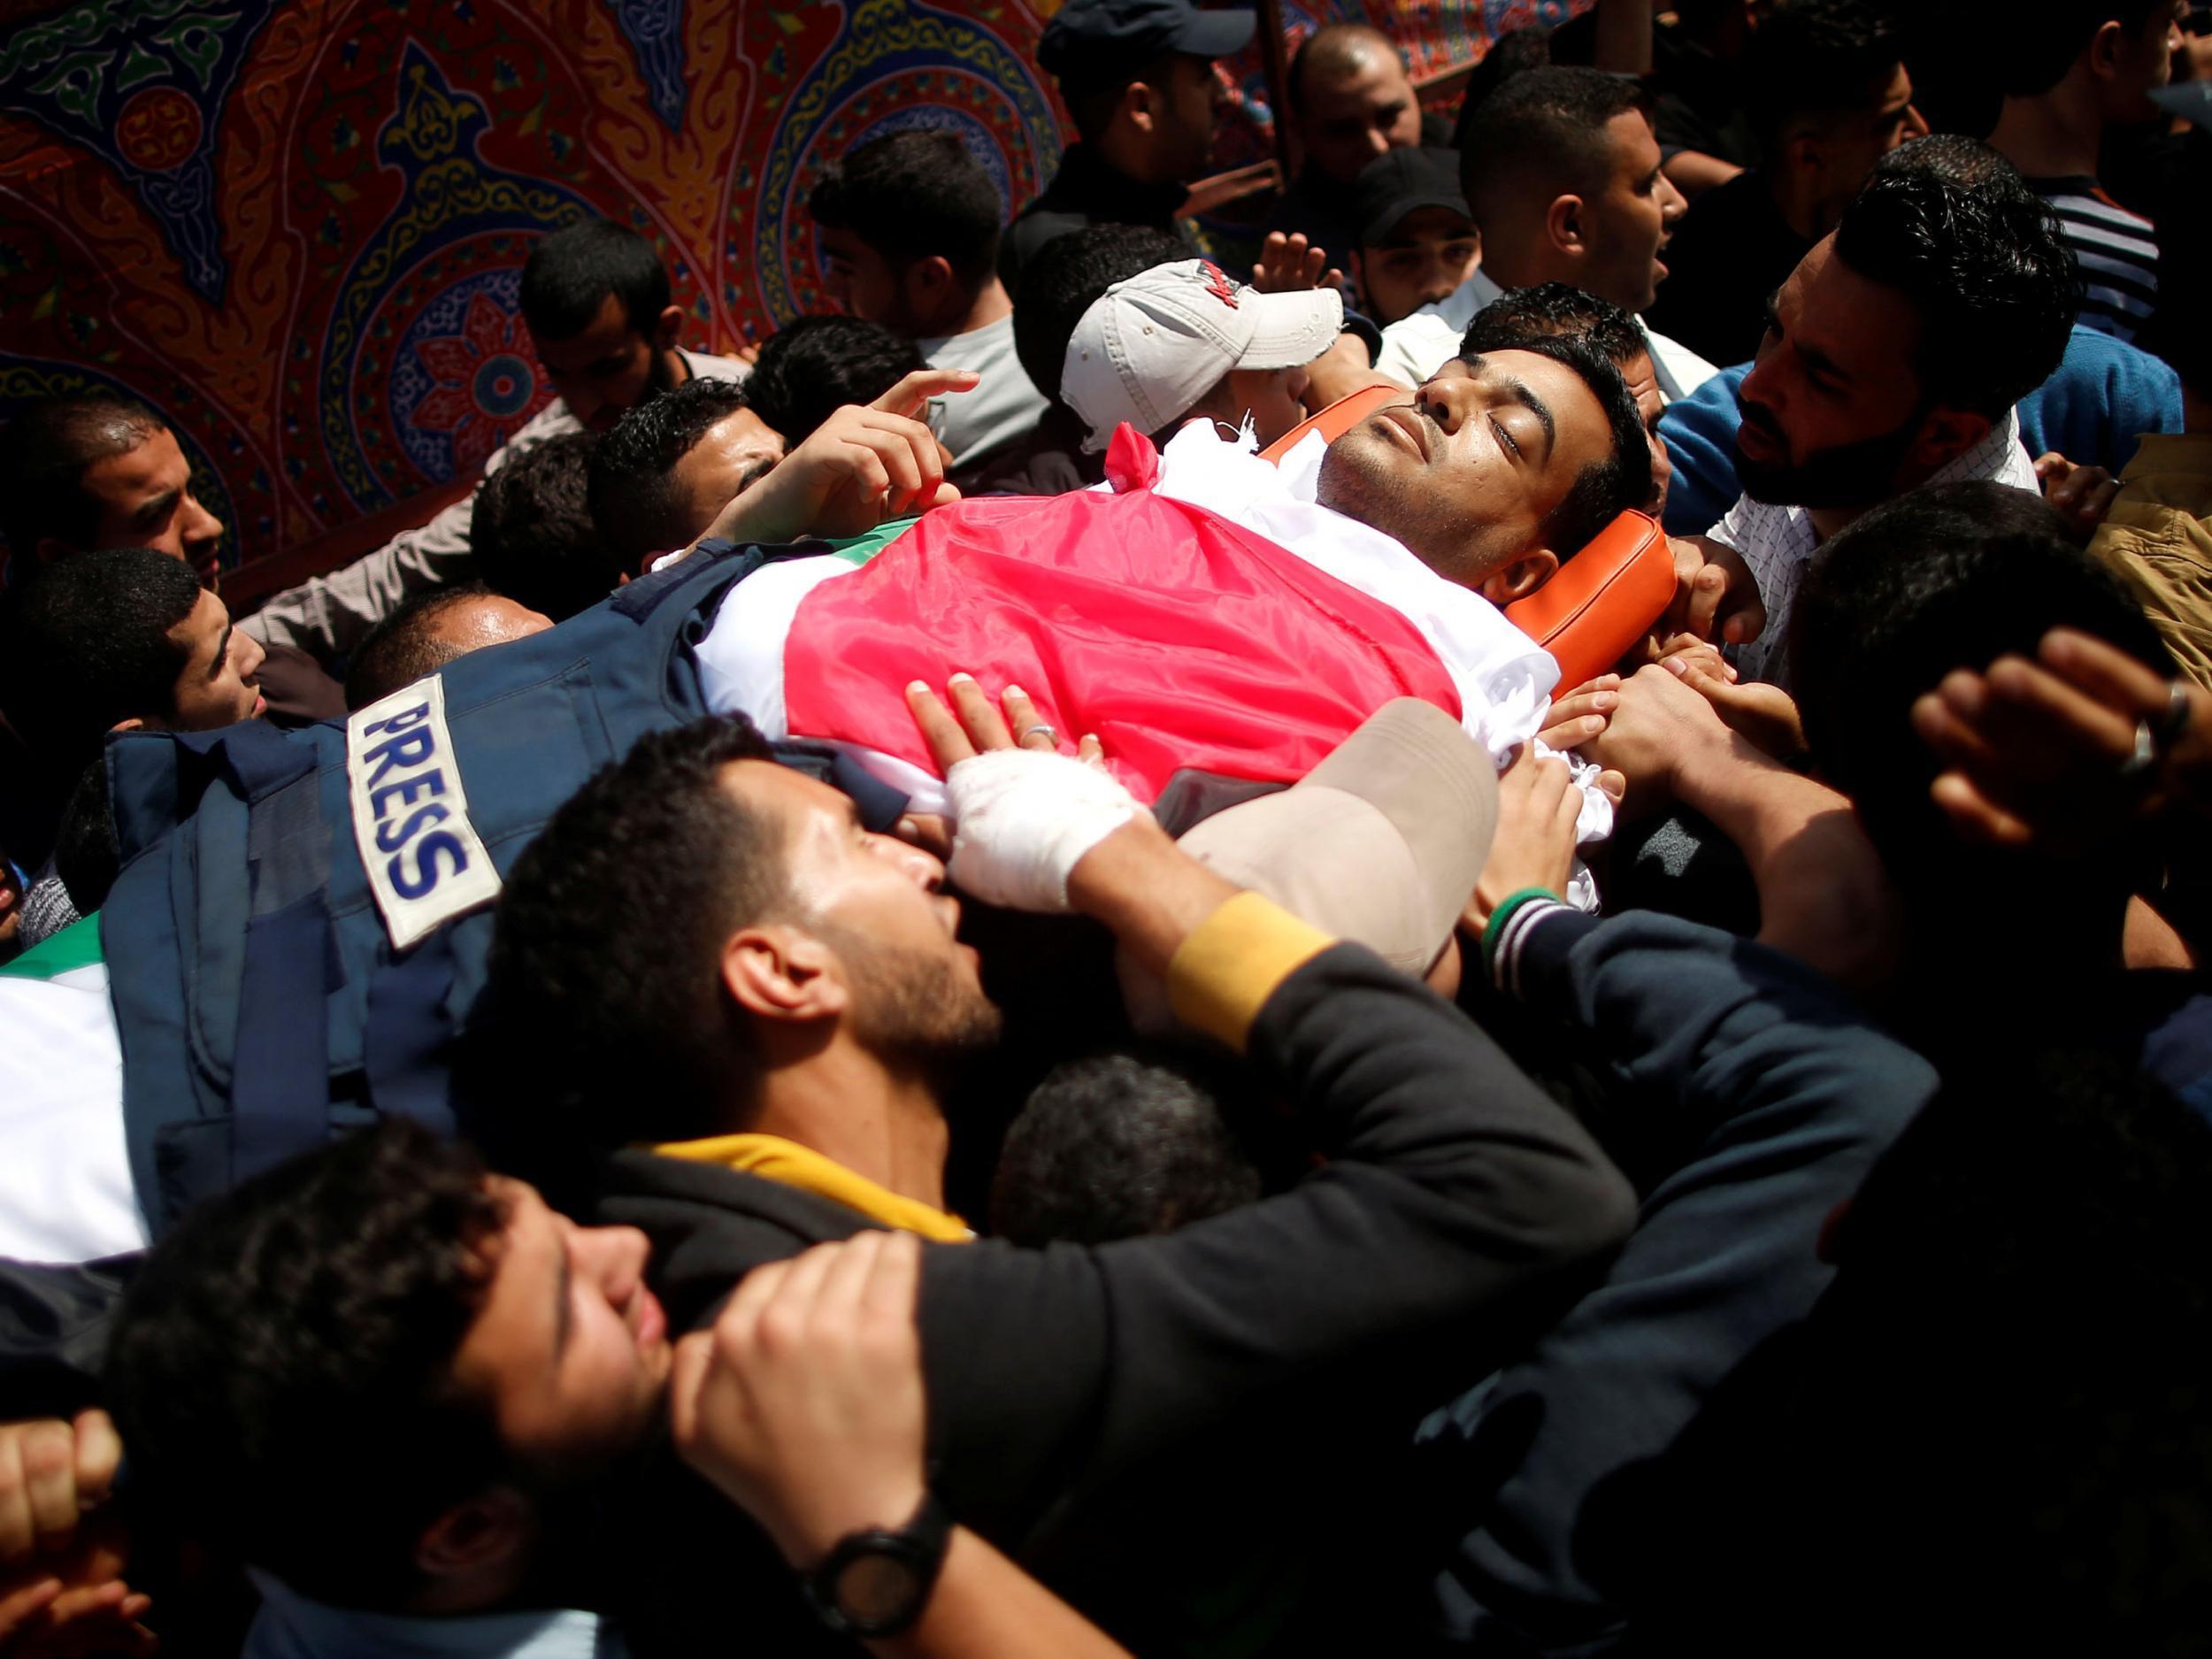 The funeral of Yasser Murtaja took place in Gaza City on Saturday morning